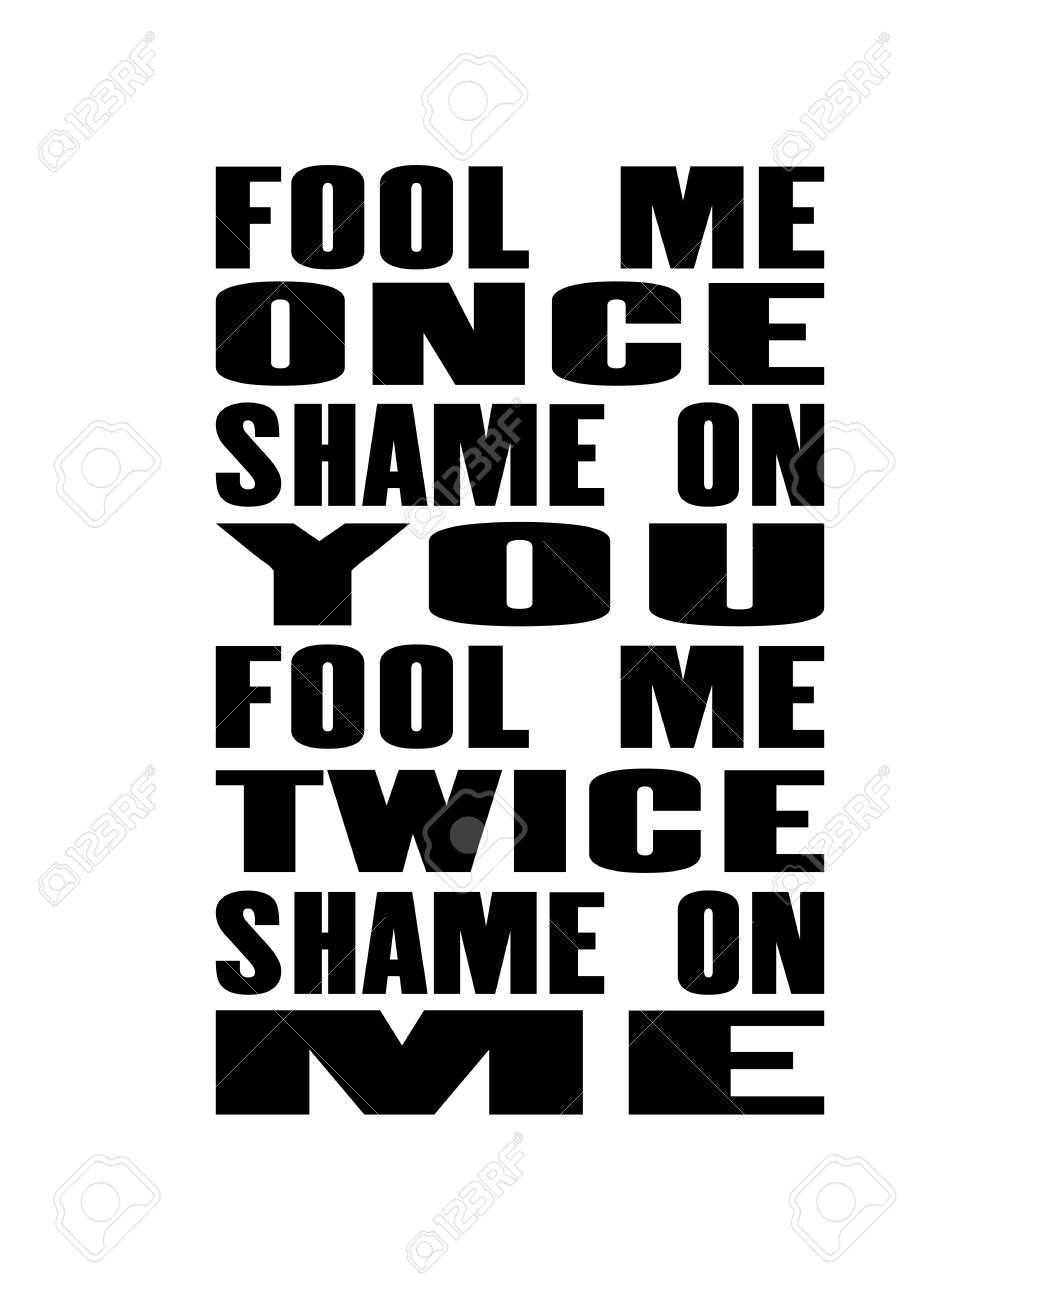 99634940-inspiring-motivation-quote-with-text-fool-me-once-shame-on-you-fool-me-twice-shame-on-me-vector-typo.jpg